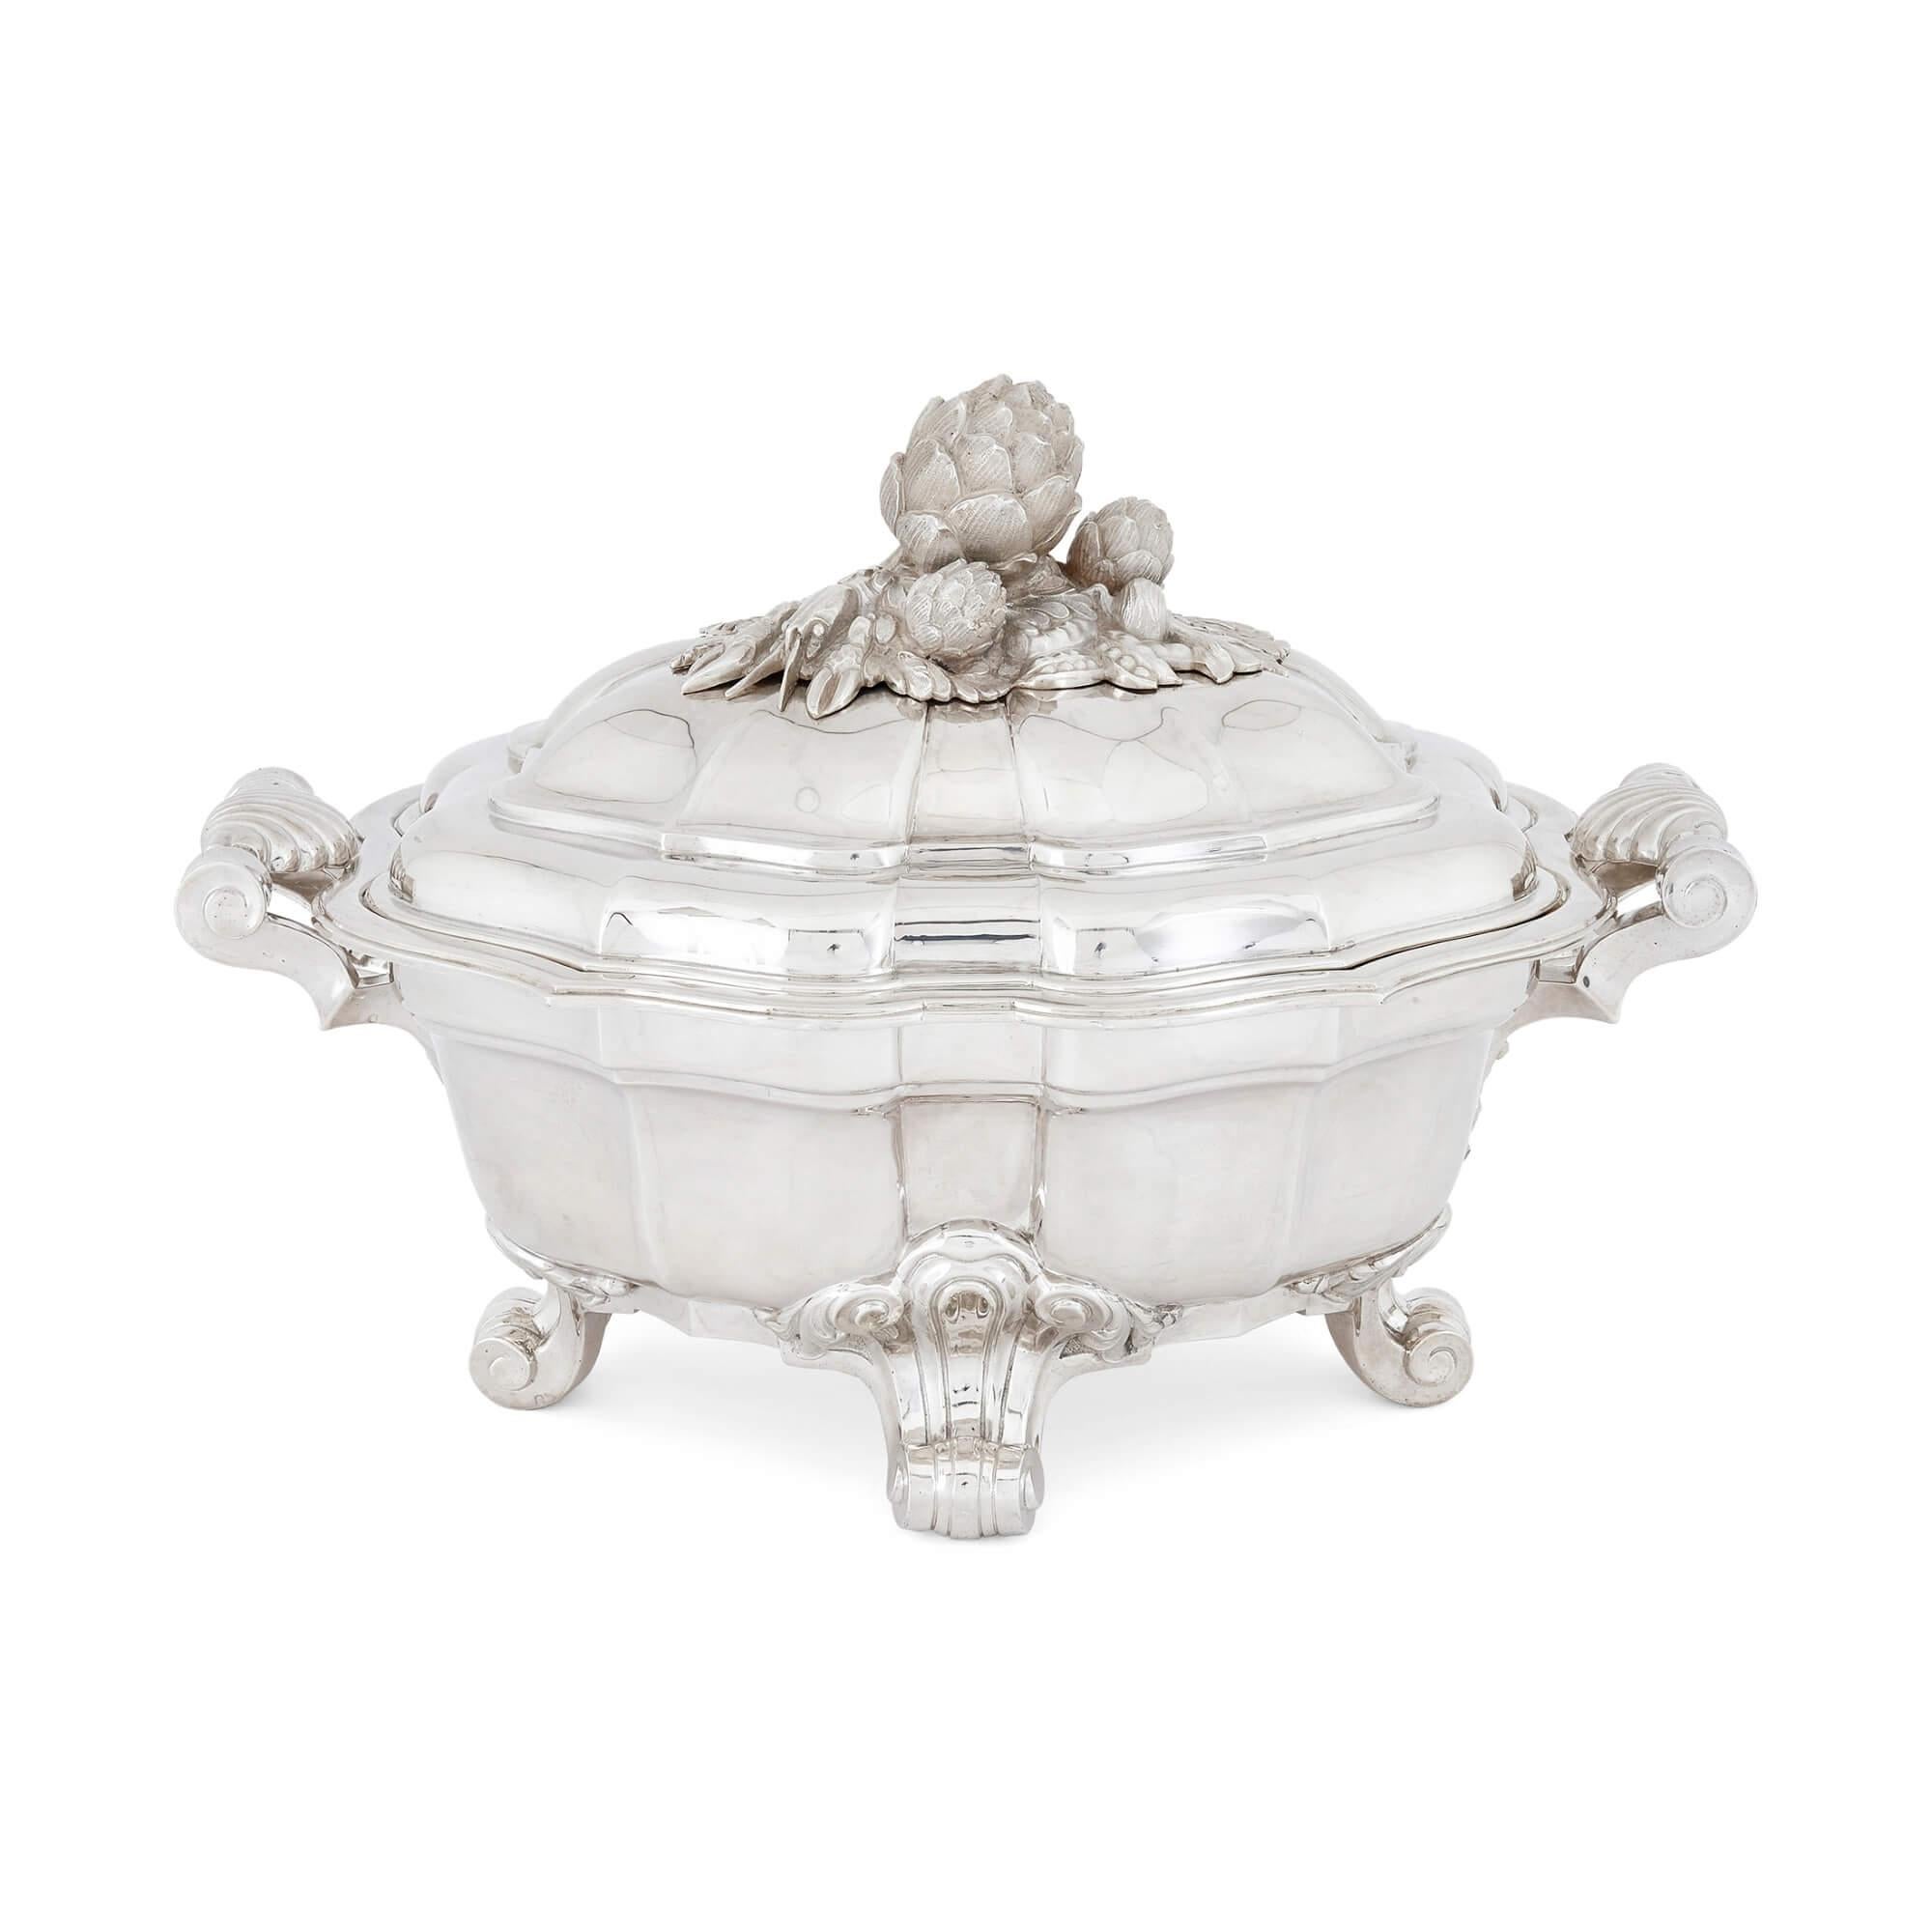 French solid silver sauce tureen and tray by Tétard.
French, early 20th century.
Tureen: Height 30cm, width 40cm, depth 28cm.
Tray: height 6cm, width 65cm, depth 42cm.

This elegant tureen is a wonderful example of early twentieth-century